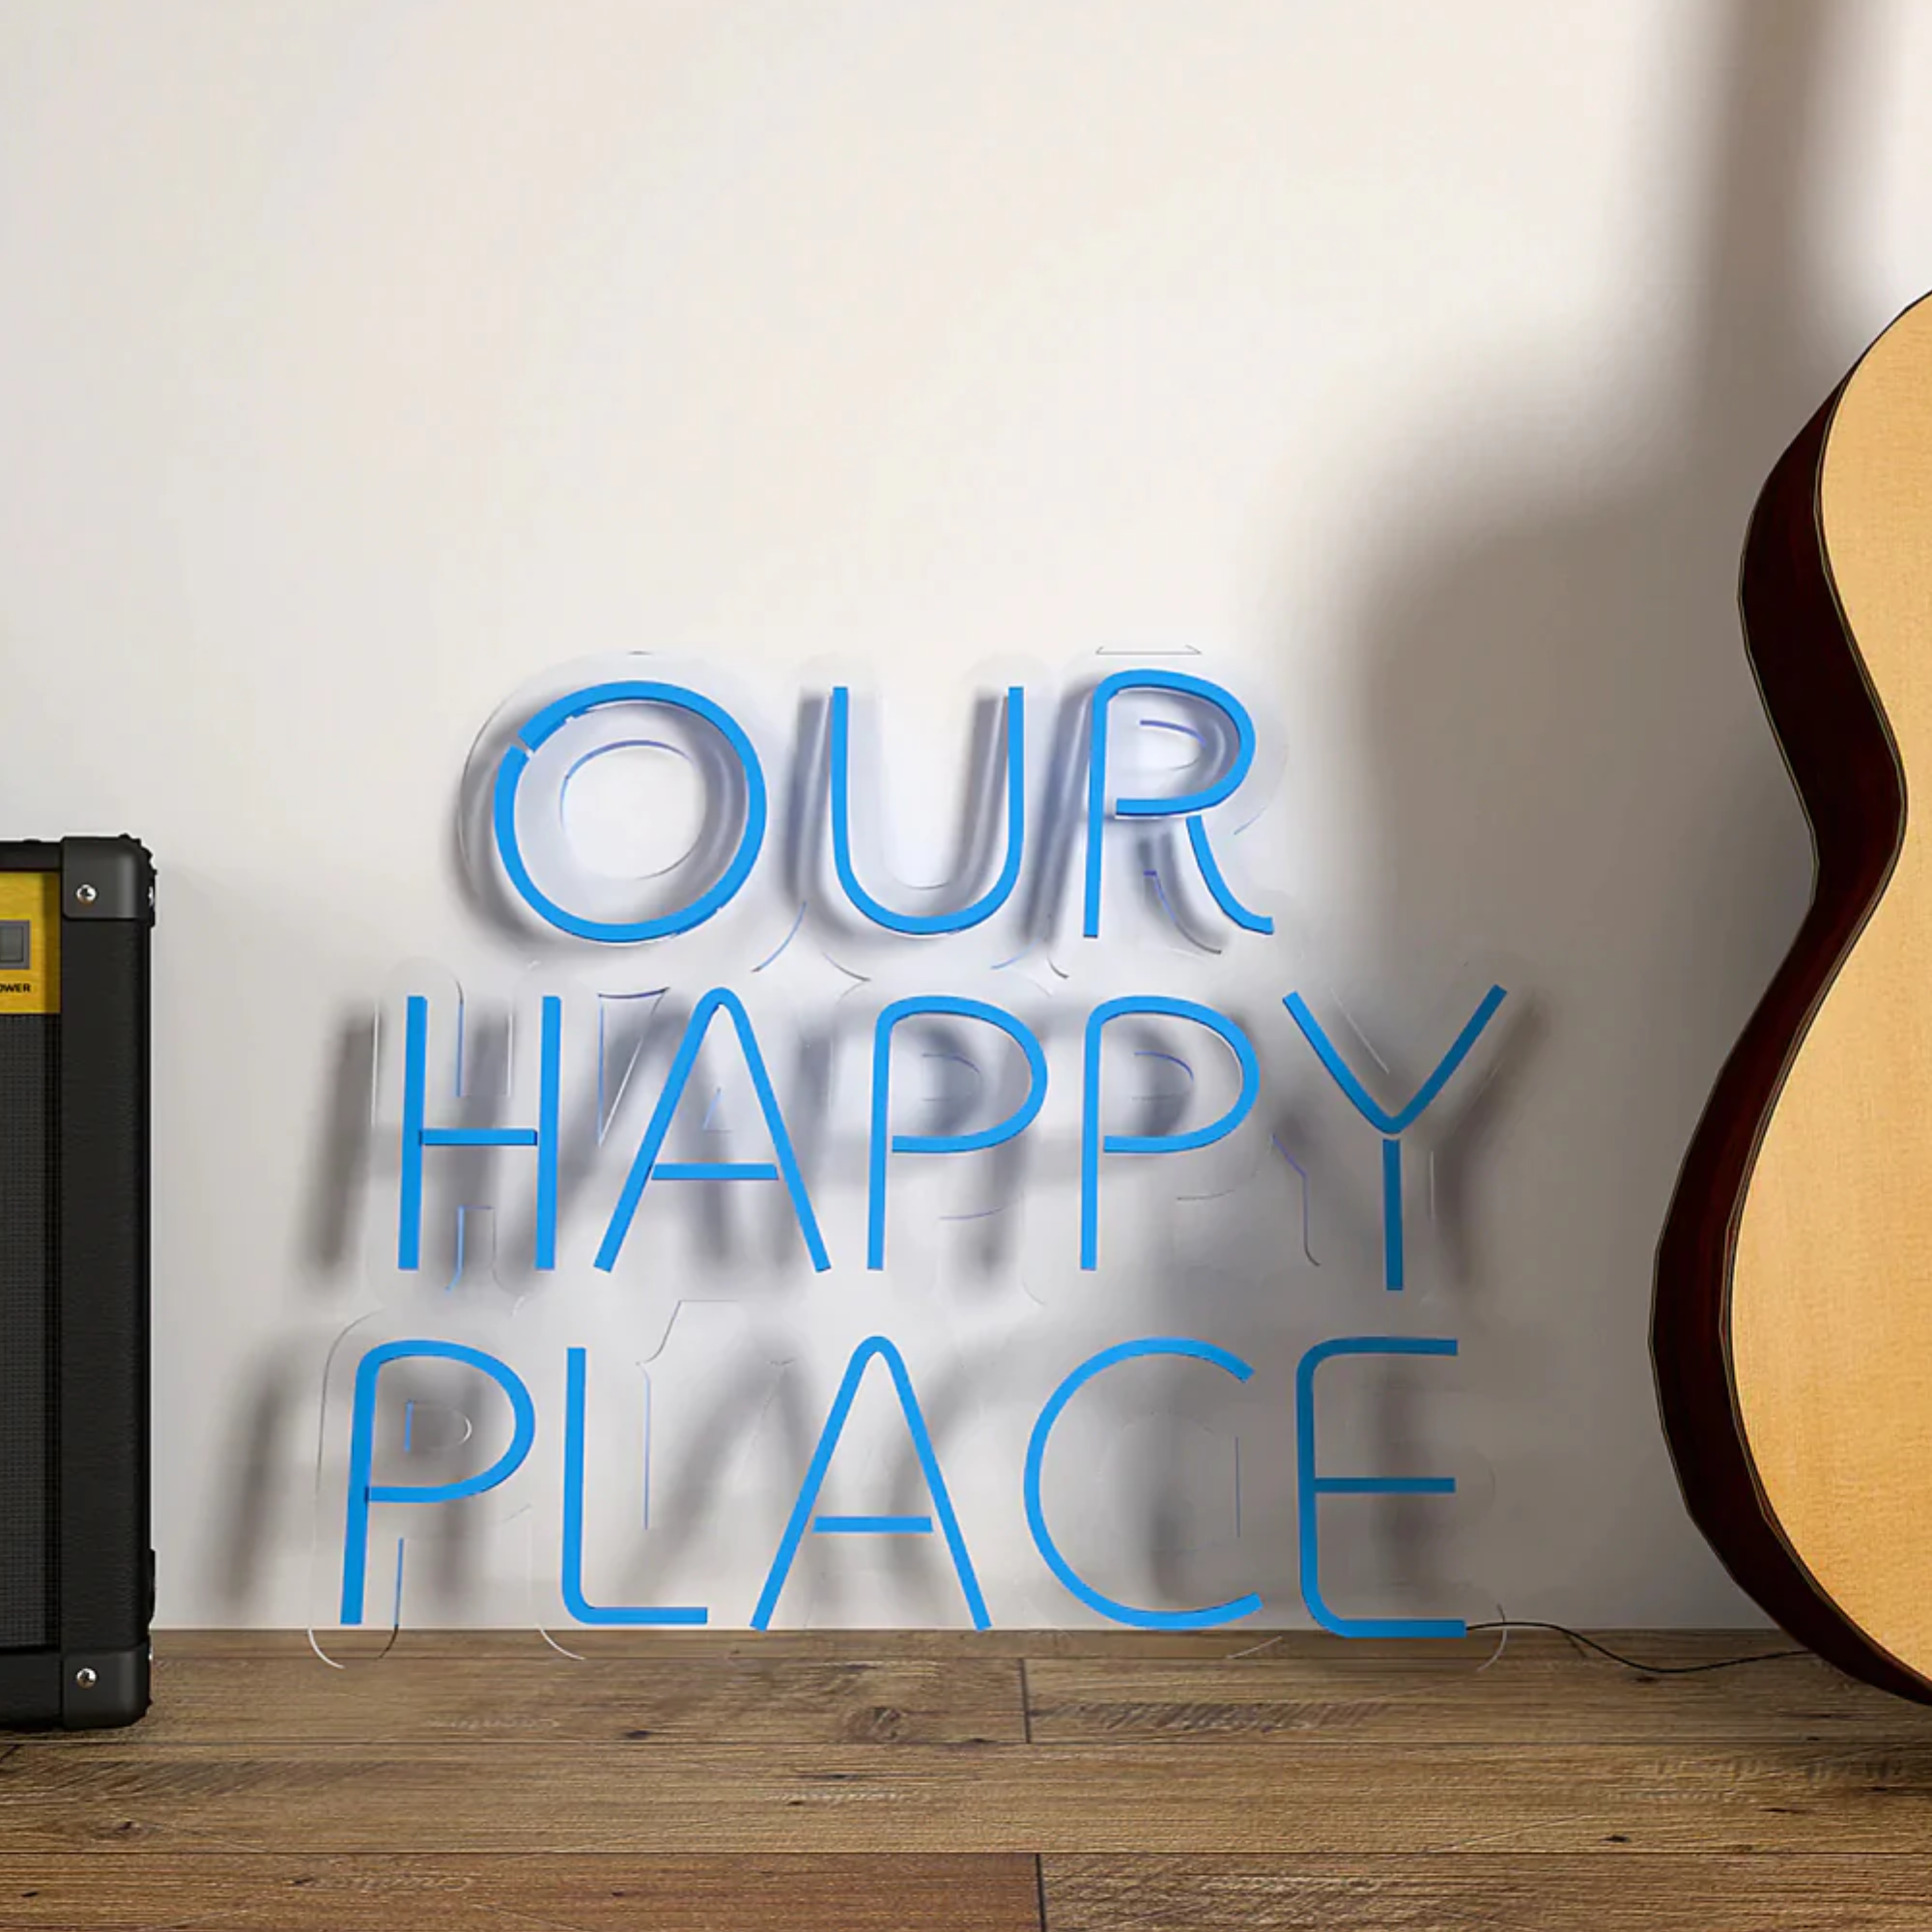 Our Happy Place Text Neon LED Light